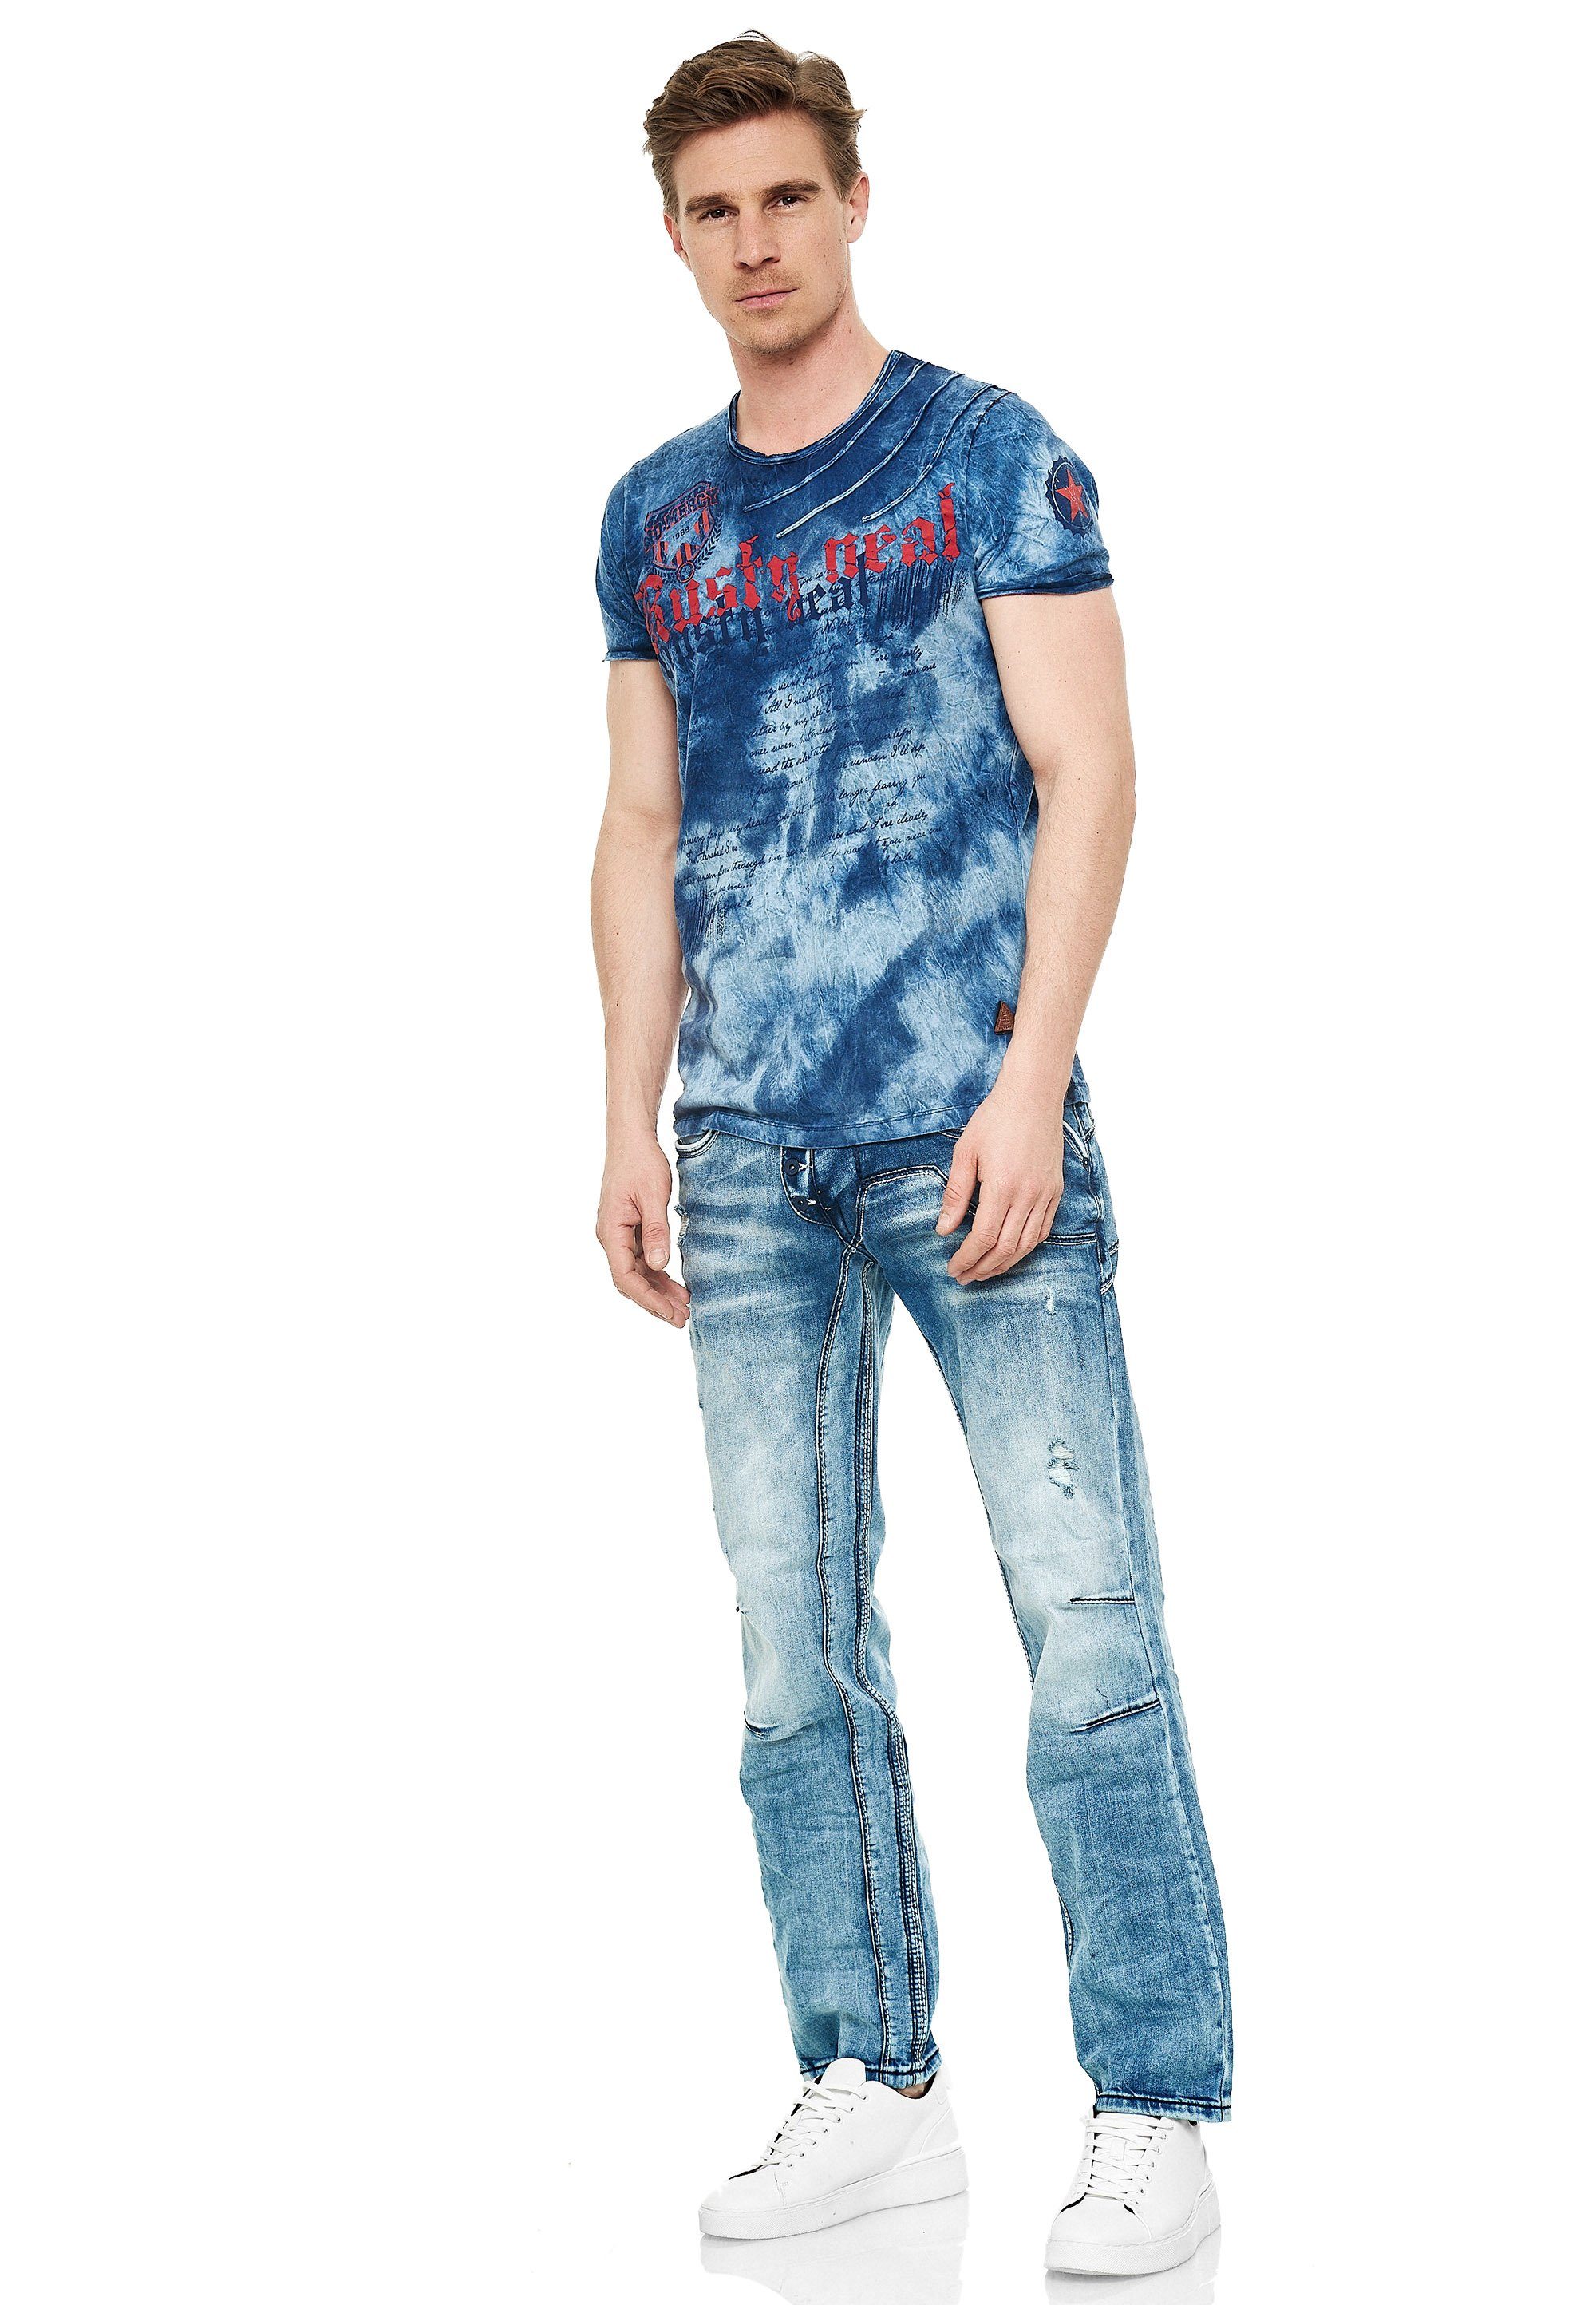 Rusty Neal Jeans Waschung mit cooler Bequeme